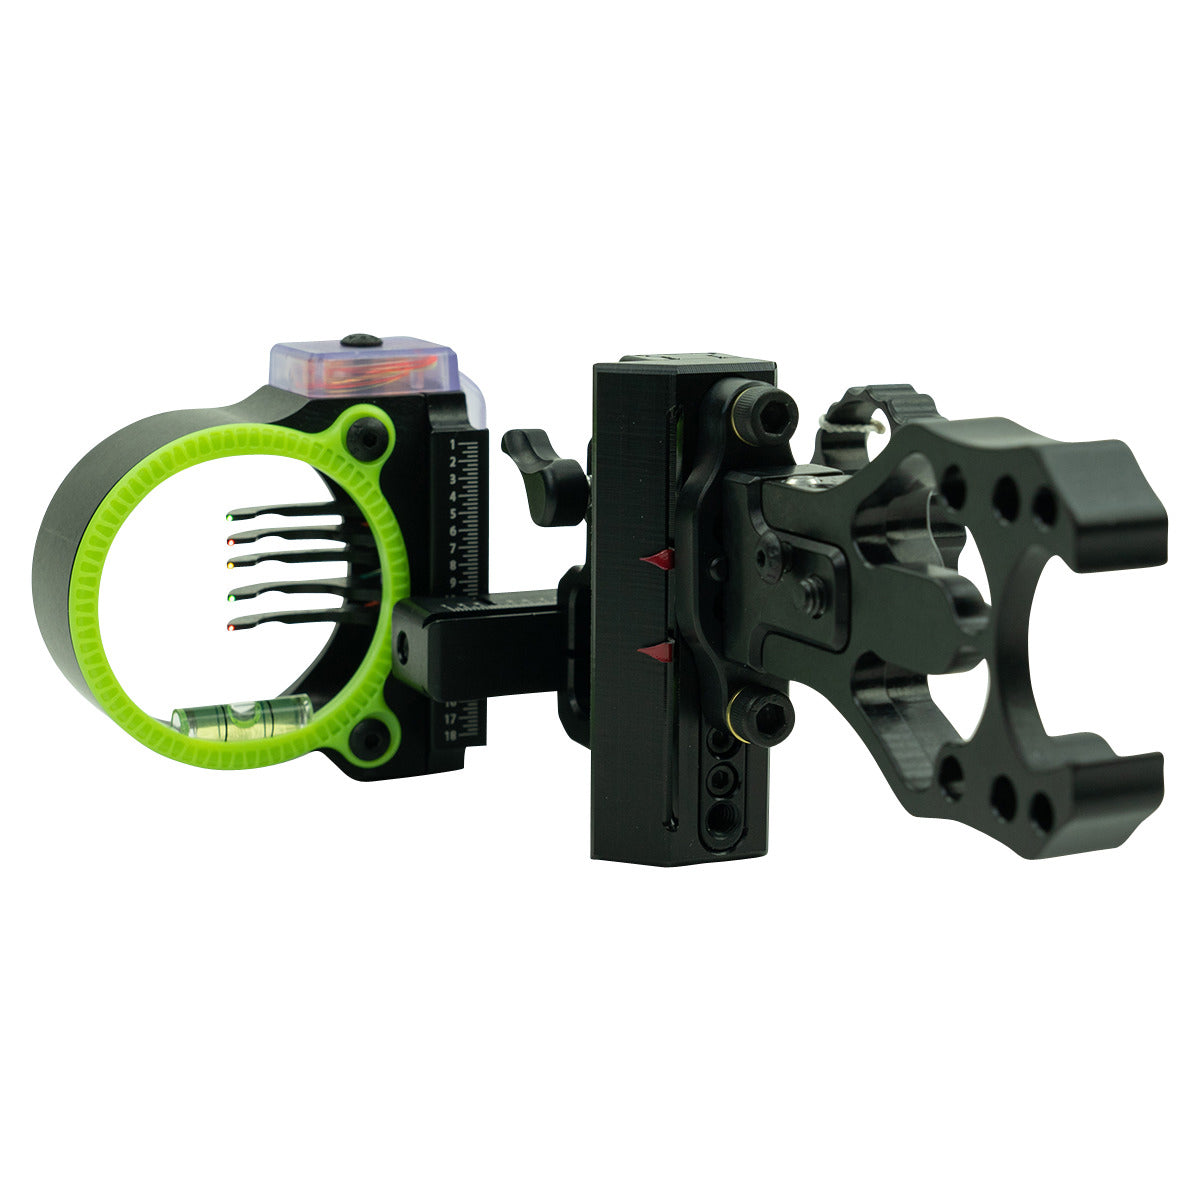 Black Gold Ascent Mountain Lite 5 Pin Bow Sight in Black Gold Ascent Mountain Lite 5 Pin Bow Sight by Black Gold | Archery - goHUNT Shop by GOHUNT | Black Gold - GOHUNT Shop